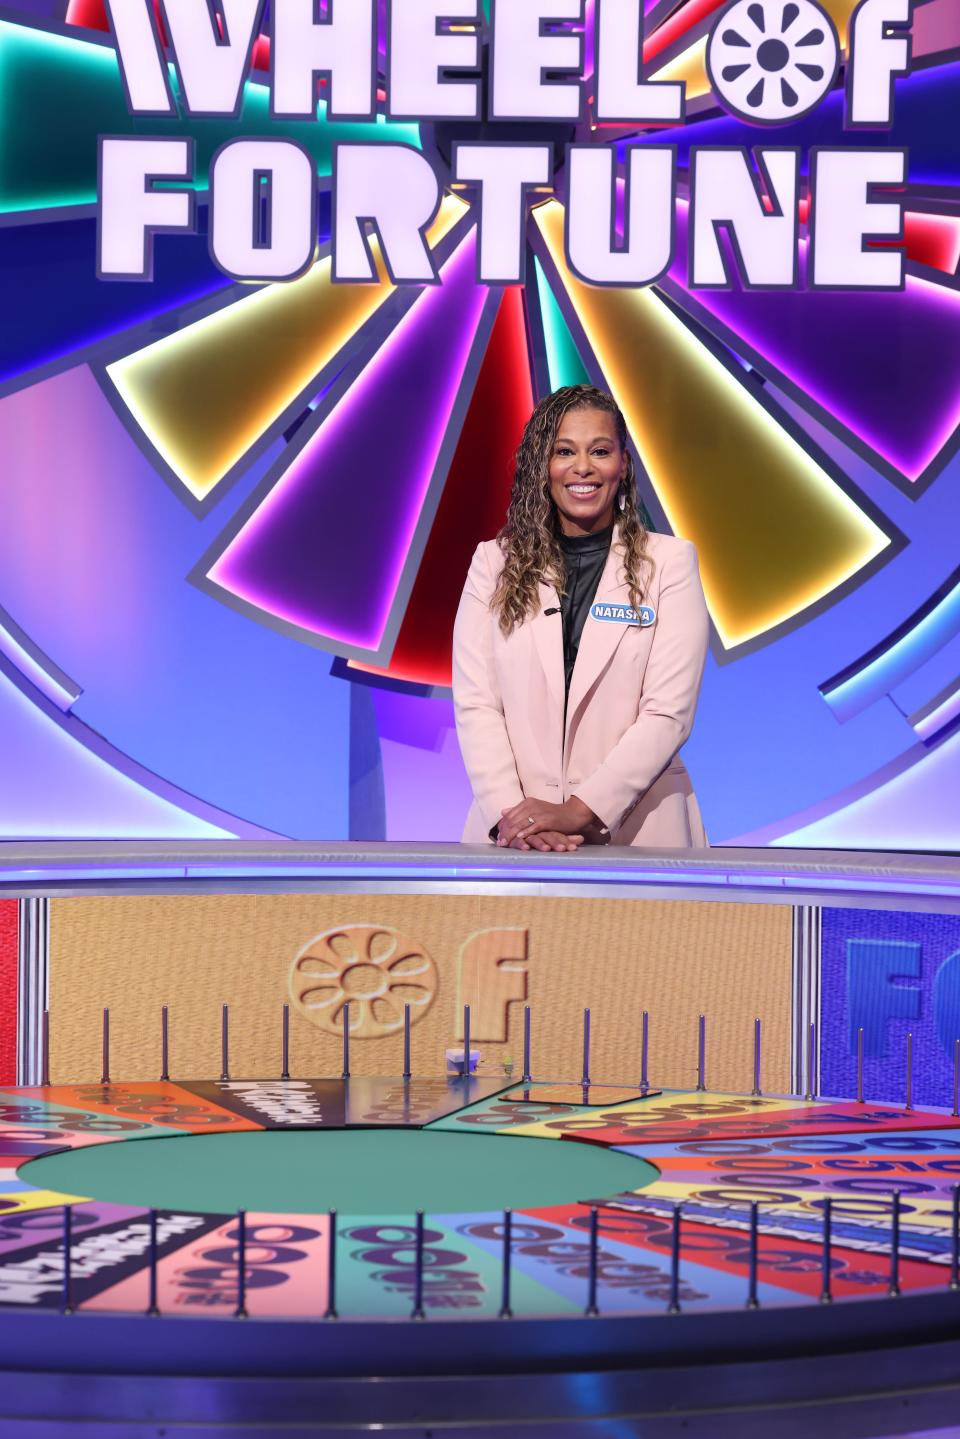 Cape Cod resident Natasha Cash realized her lifelong dream of playing Wheel of Fortune. She was a contestant in this week's episode.